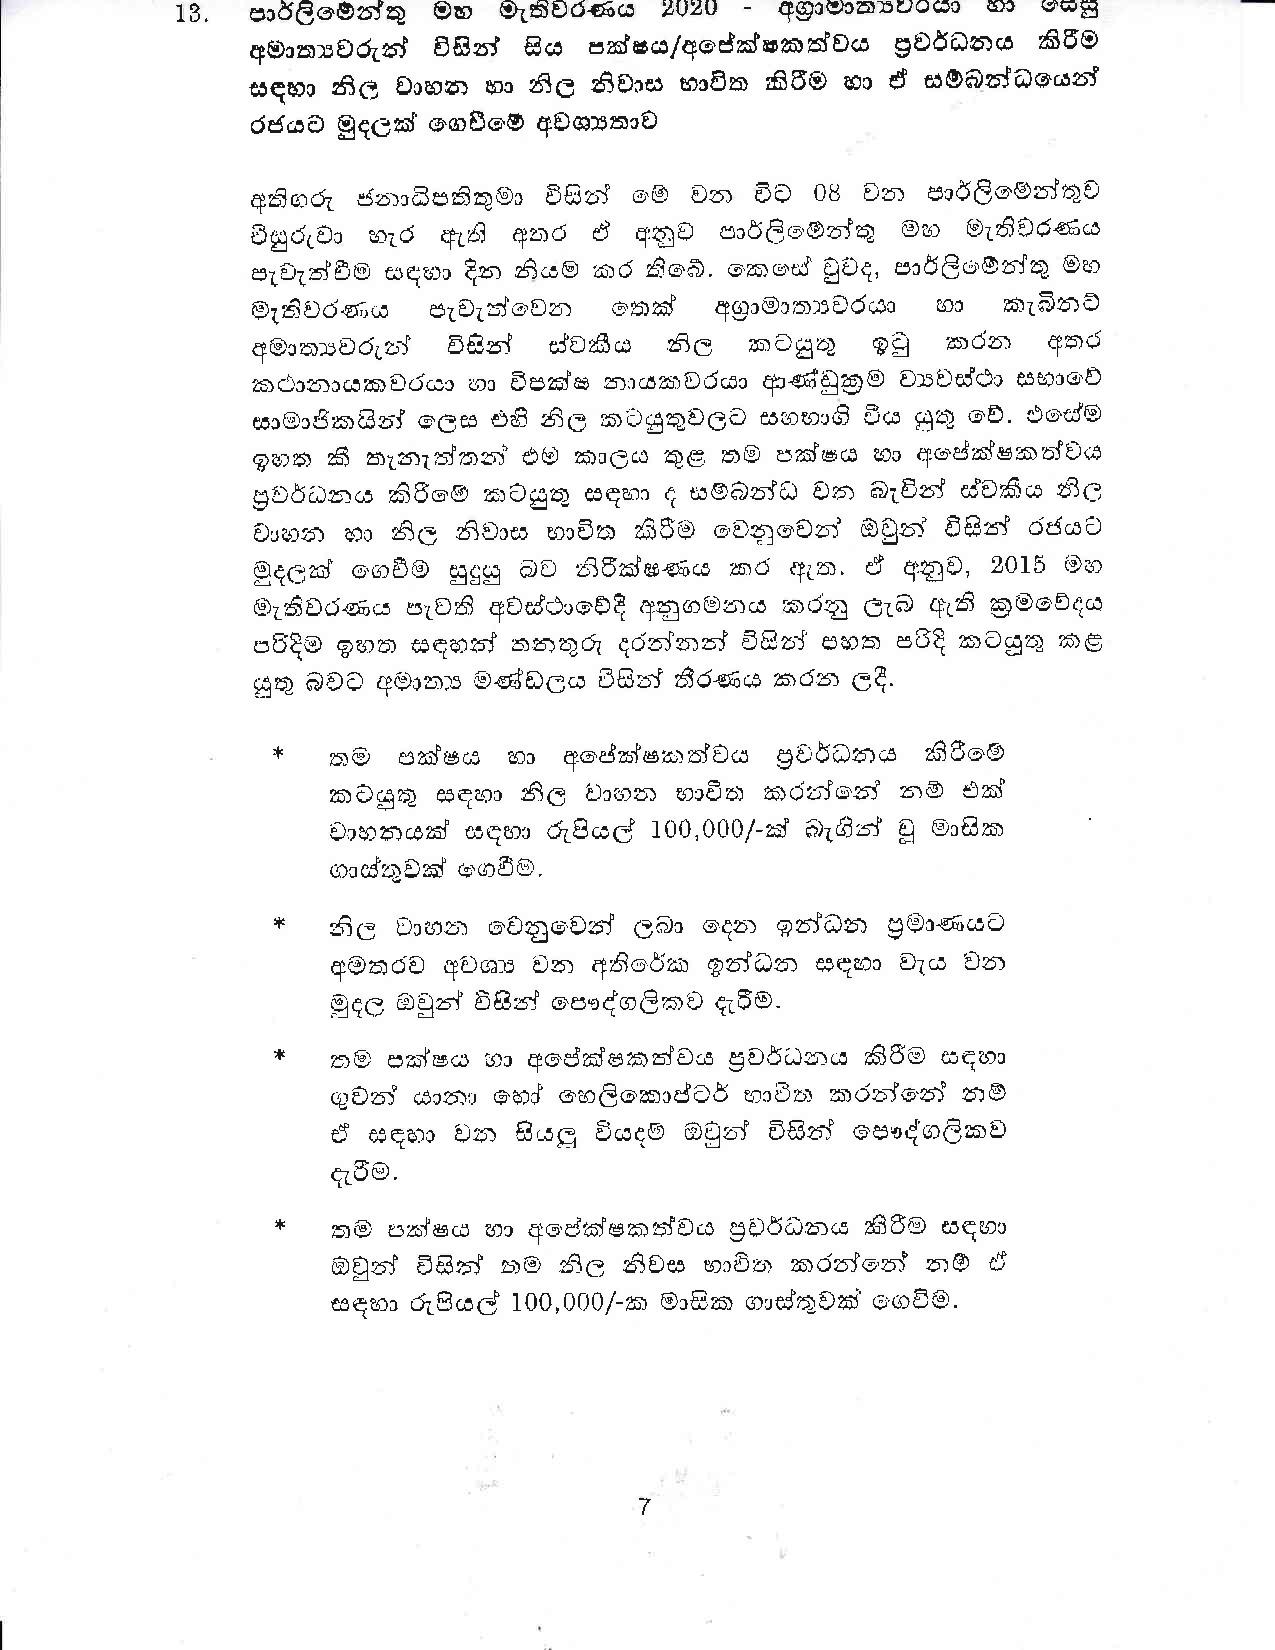 Cabinet Decision on sinhala 18.03.2020 page 007